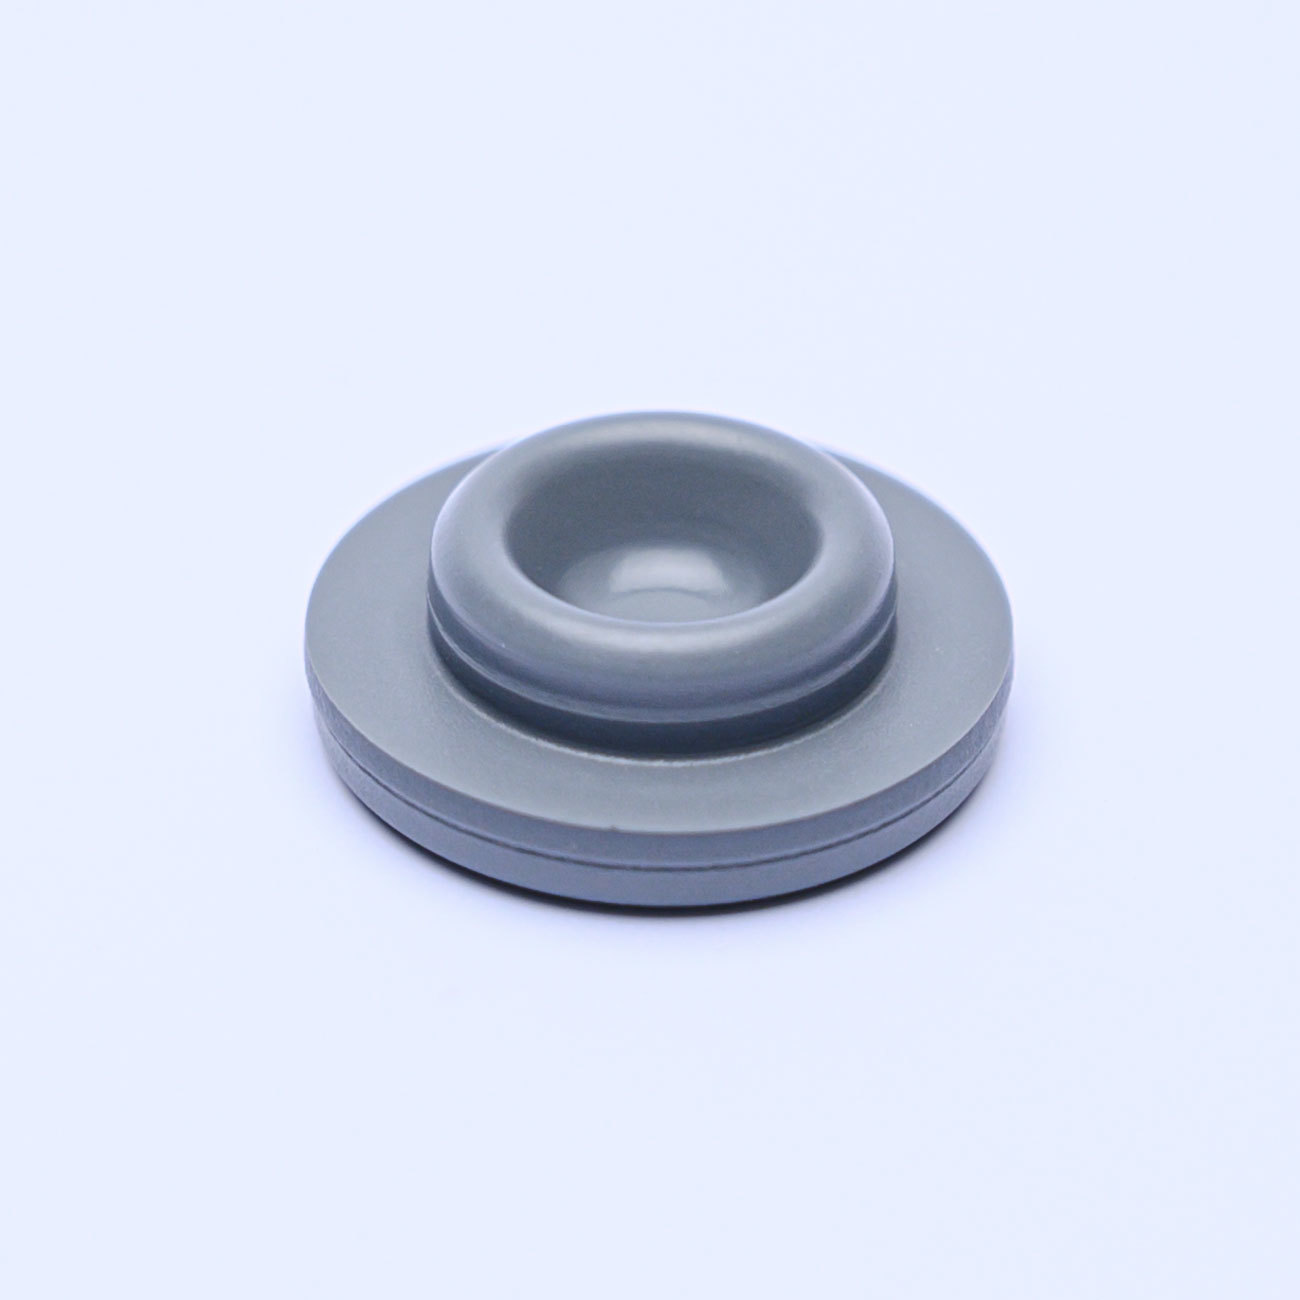 Film-coated rubber stopper for sterile powder for injection